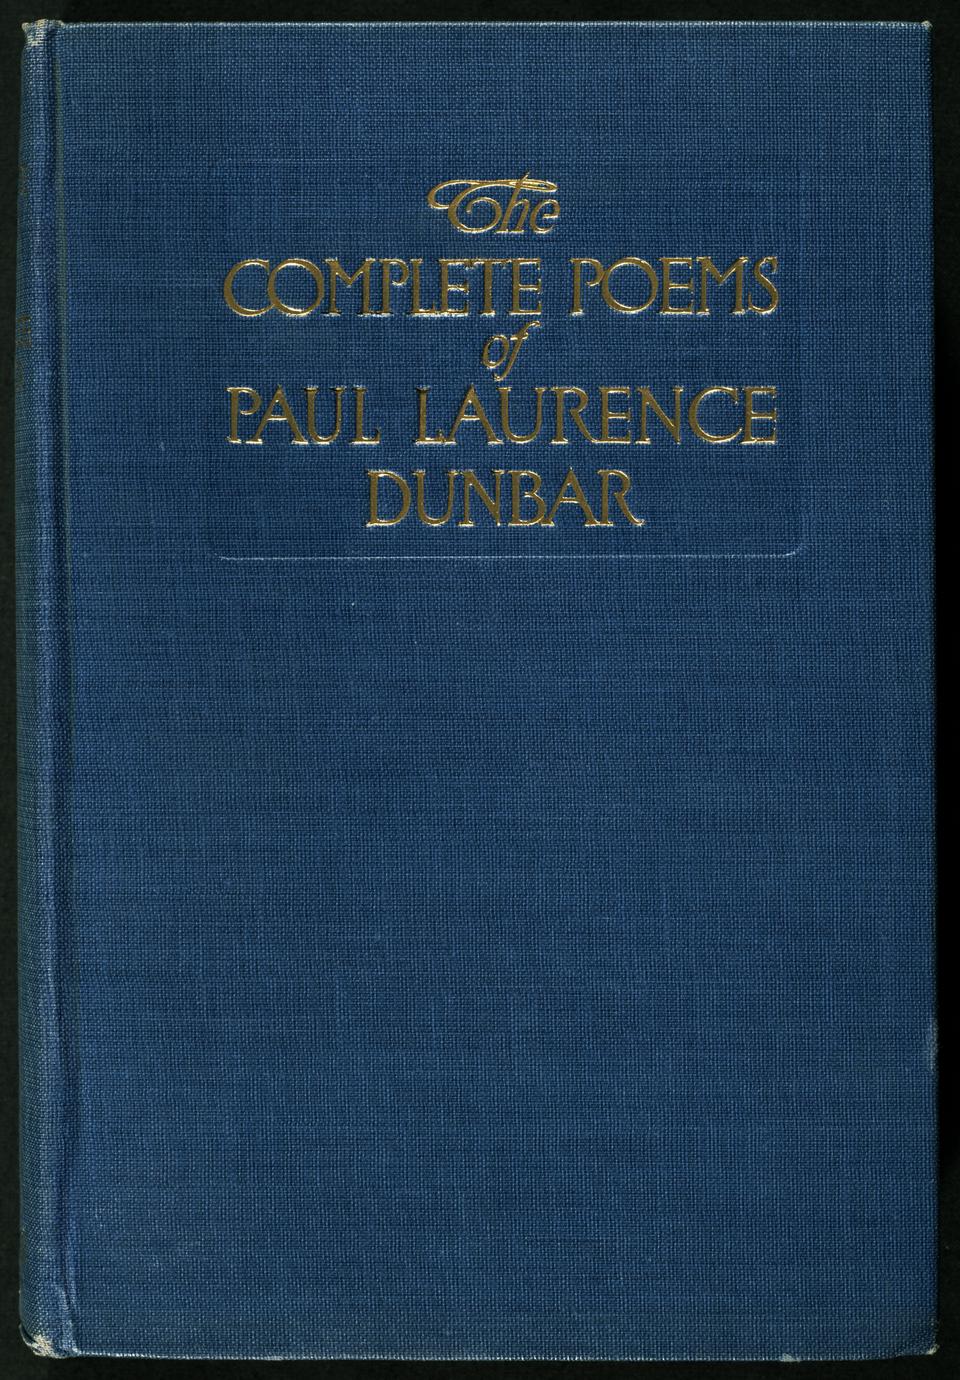 The complete poems of Paul Laurence Dunbar (1 of 2)